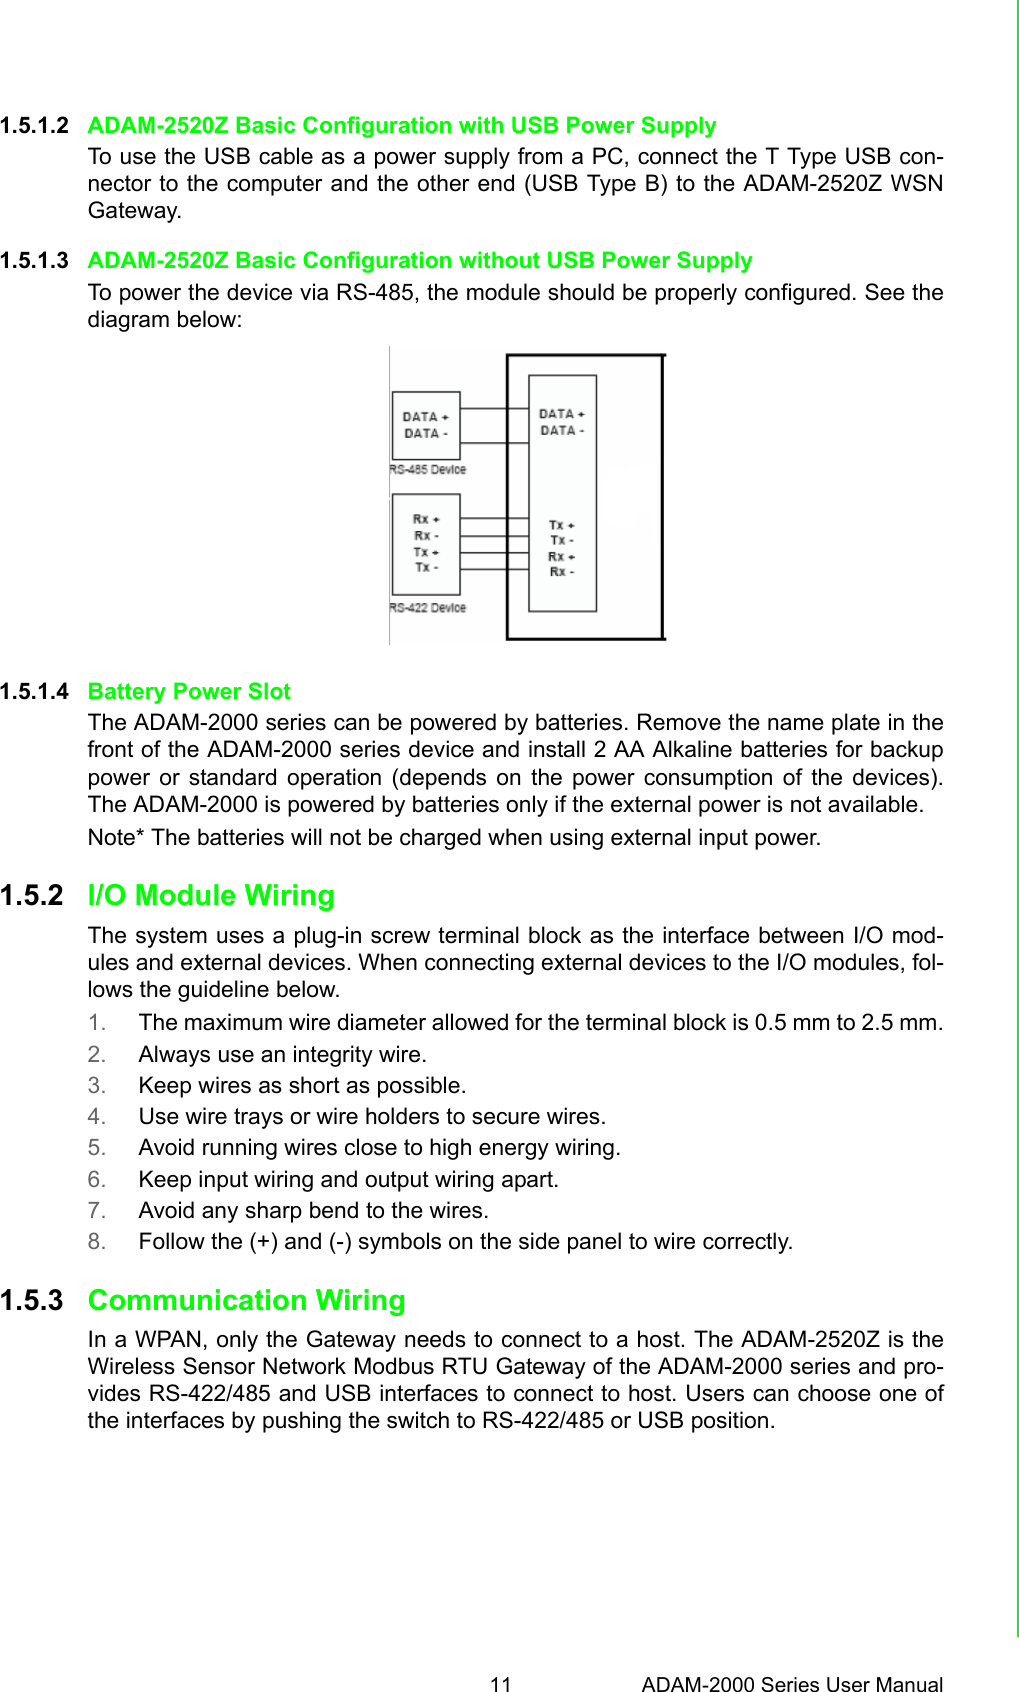 11 ADAM-2000 Series User ManualChapter 1 Understanding Your System1.5.1.2 ADAM-2520Z Basic Configuration with USB Power SupplyTo use the USB cable as a power supply from a PC, connect the T Type USB con-nector to the computer and the other end (USB Type B) to the ADAM-2520Z WSNGateway.1.5.1.3 ADAM-2520Z Basic Configuration without USB Power SupplyTo power the device via RS-485, the module should be properly configured. See thediagram below:1.5.1.4 Battery Power SlotThe ADAM-2000 series can be powered by batteries. Remove the name plate in thefront of the ADAM-2000 series device and install 2 AA Alkaline batteries for backuppower or standard operation (depends on the power consumption of the devices).The ADAM-2000 is powered by batteries only if the external power is not available.Note* The batteries will not be charged when using external input power.1.5.2 I/O Module WiringThe system uses a plug-in screw terminal block as the interface between I/O mod-ules and external devices. When connecting external devices to the I/O modules, fol-lows the guideline below.1. The maximum wire diameter allowed for the terminal block is 0.5 mm to 2.5 mm.2. Always use an integrity wire.3. Keep wires as short as possible.4. Use wire trays or wire holders to secure wires.5. Avoid running wires close to high energy wiring.6. Keep input wiring and output wiring apart.7. Avoid any sharp bend to the wires.8. Follow the (+) and (-) symbols on the side panel to wire correctly.1.5.3 Communication WiringIn a WPAN, only the Gateway needs to connect to a host. The ADAM-2520Z is theWireless Sensor Network Modbus RTU Gateway of the ADAM-2000 series and pro-vides RS-422/485 and USB interfaces to connect to host. Users can choose one ofthe interfaces by pushing the switch to RS-422/485 or USB position.